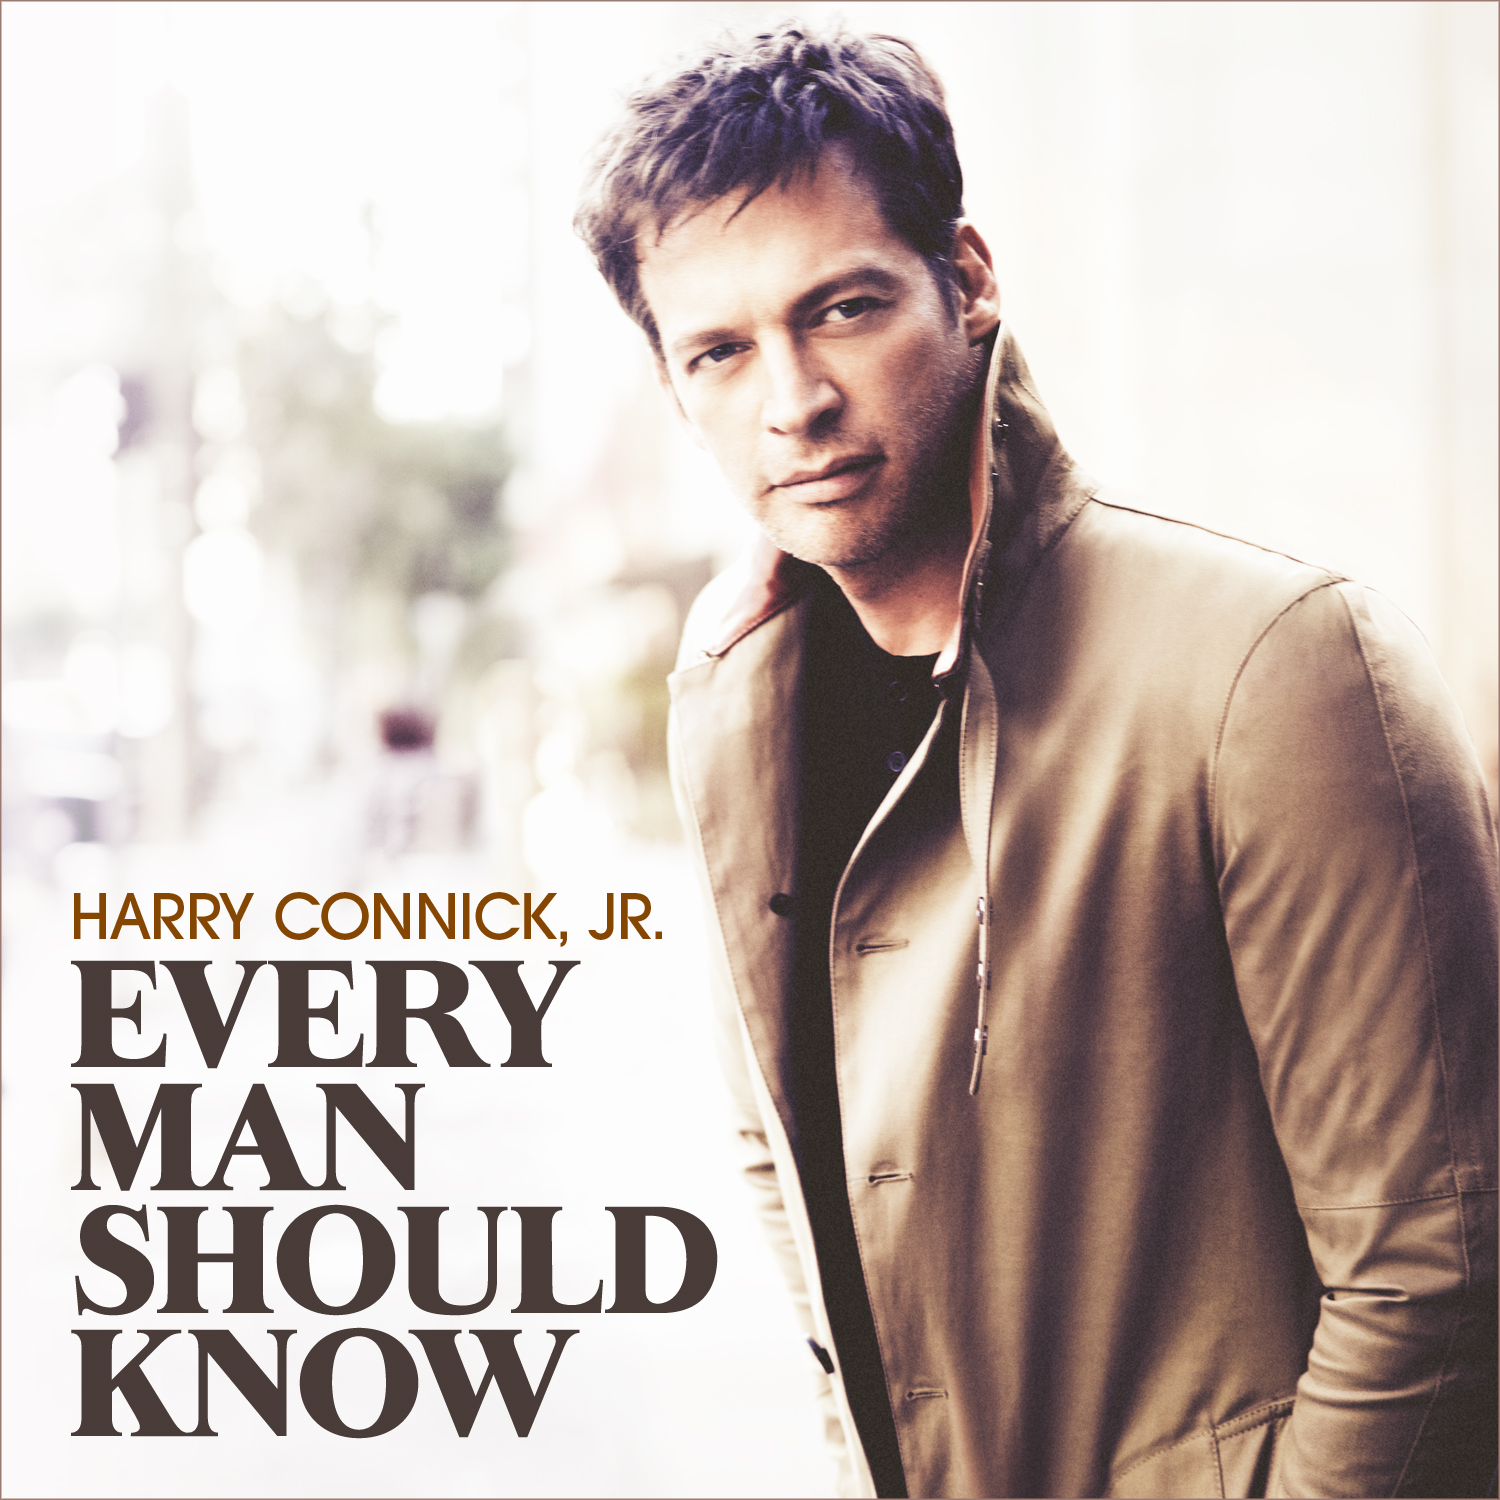 News Added May 14, 2013 Harry Connick, Jr. has built a reputation for musical and emotional honesty. Never one to rest on his ever-growing list of laurels, Connick exposes his feelings as never before on Every Man Should Know. The new CD contains twelve original songs for which Connick wrote music, lyrics and arrangements. "No […]